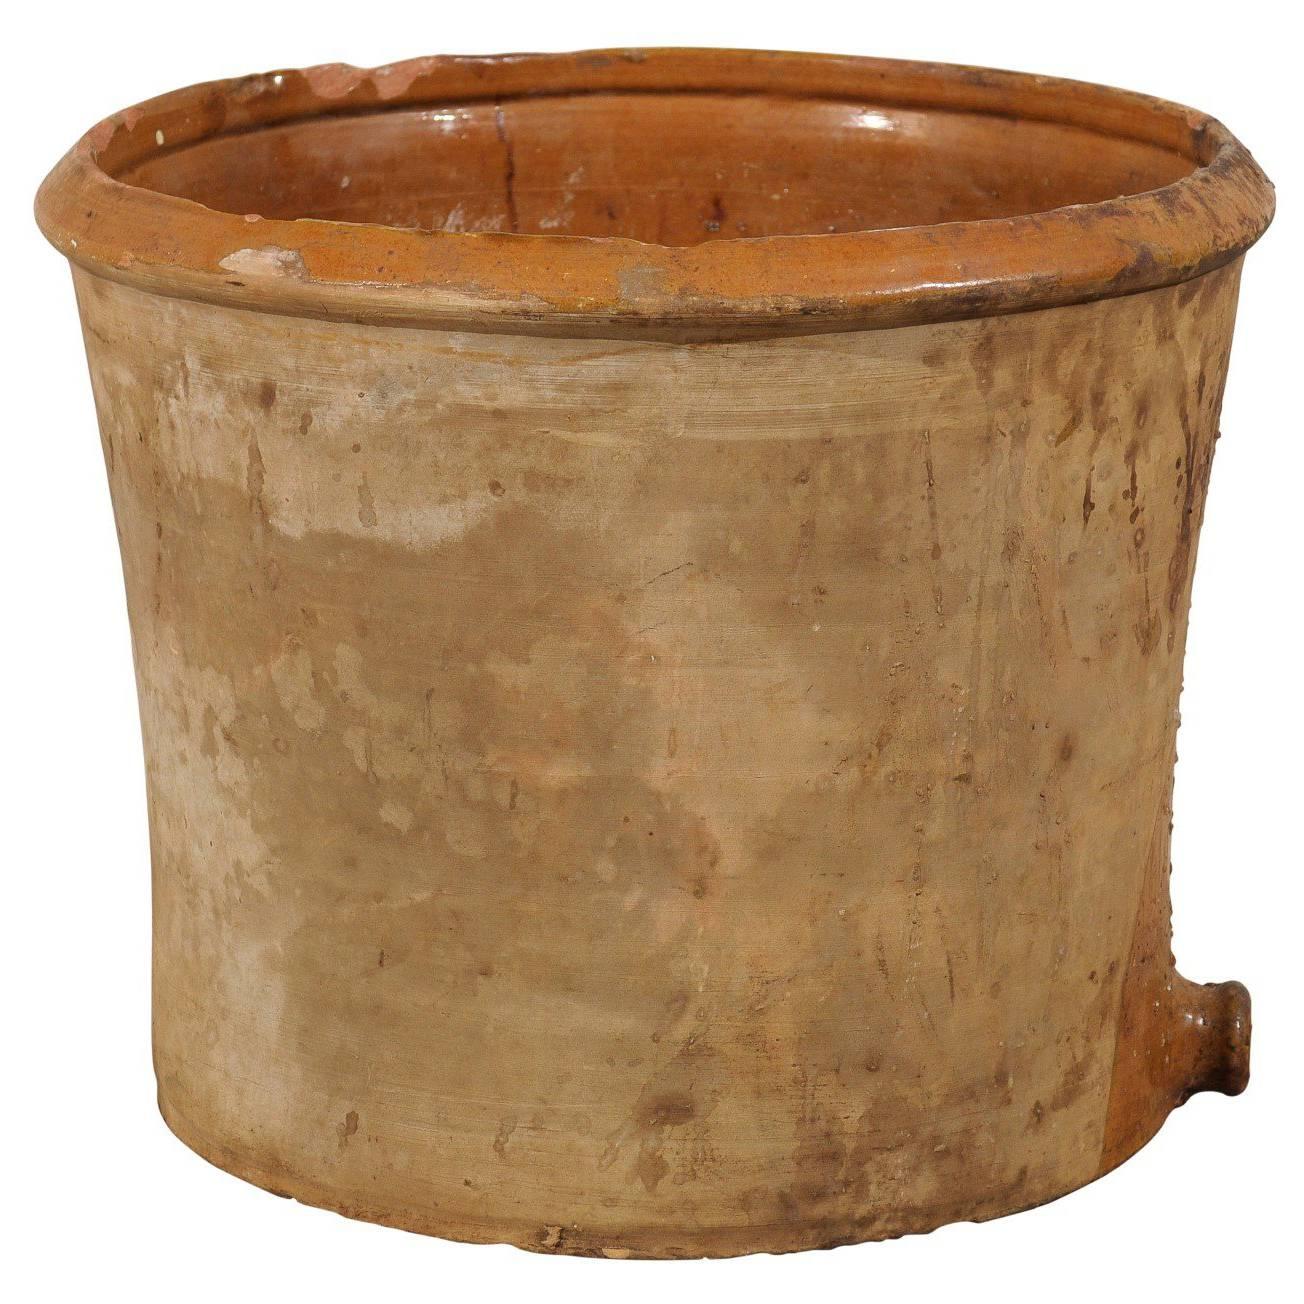 How can I age a terracotta pot?